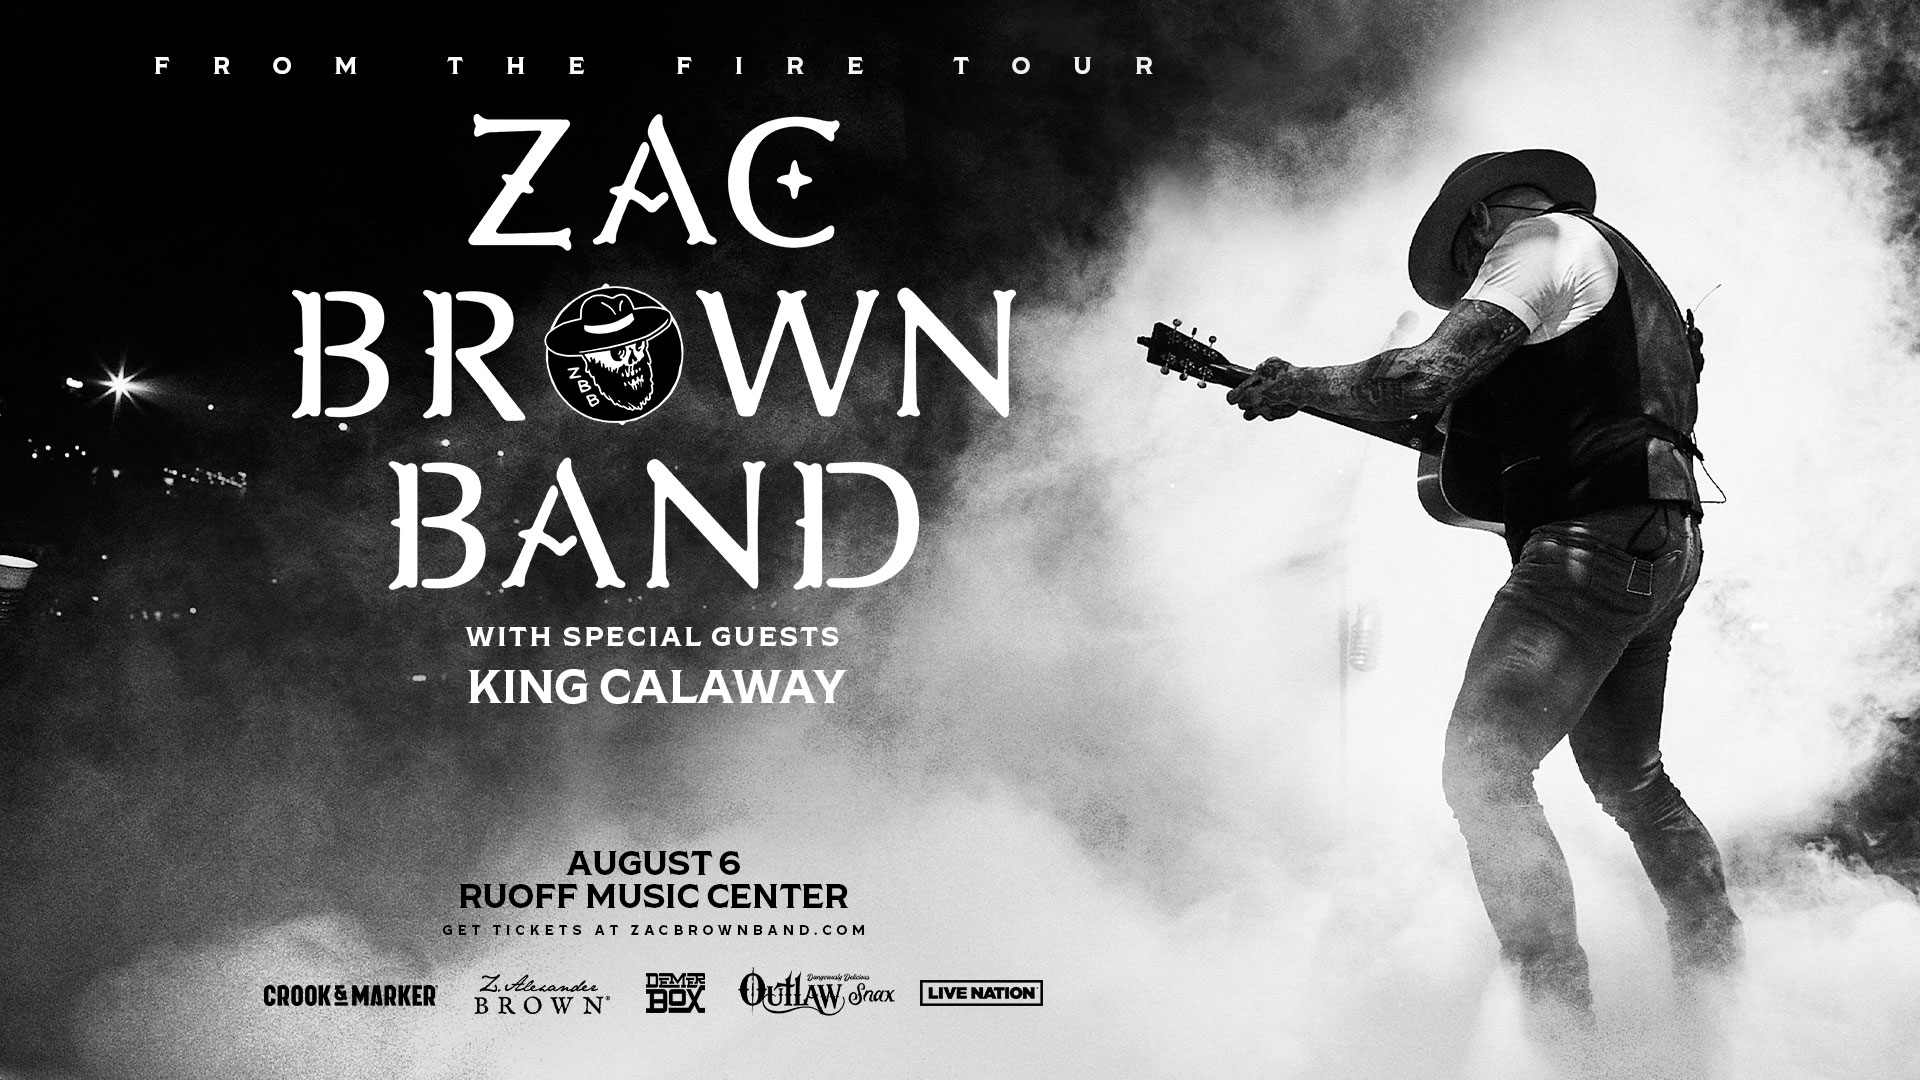 Zac Brown Band With King Calaway is coming to the Ruoff Music Center on August 6th!